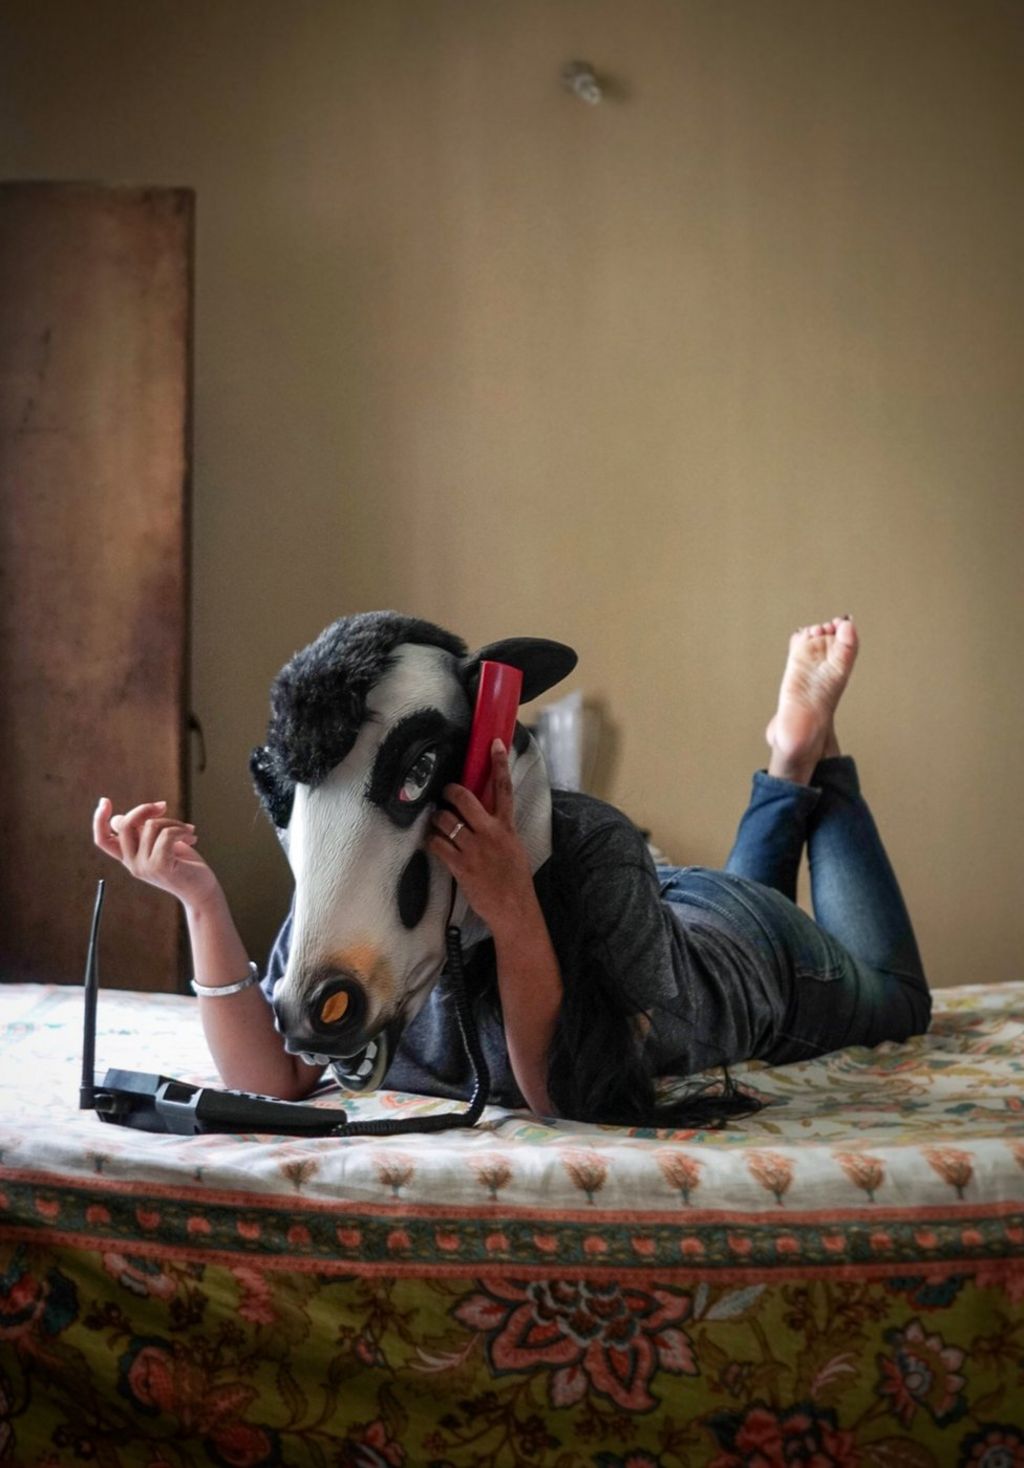 Why are Indian women wearing cow masks?